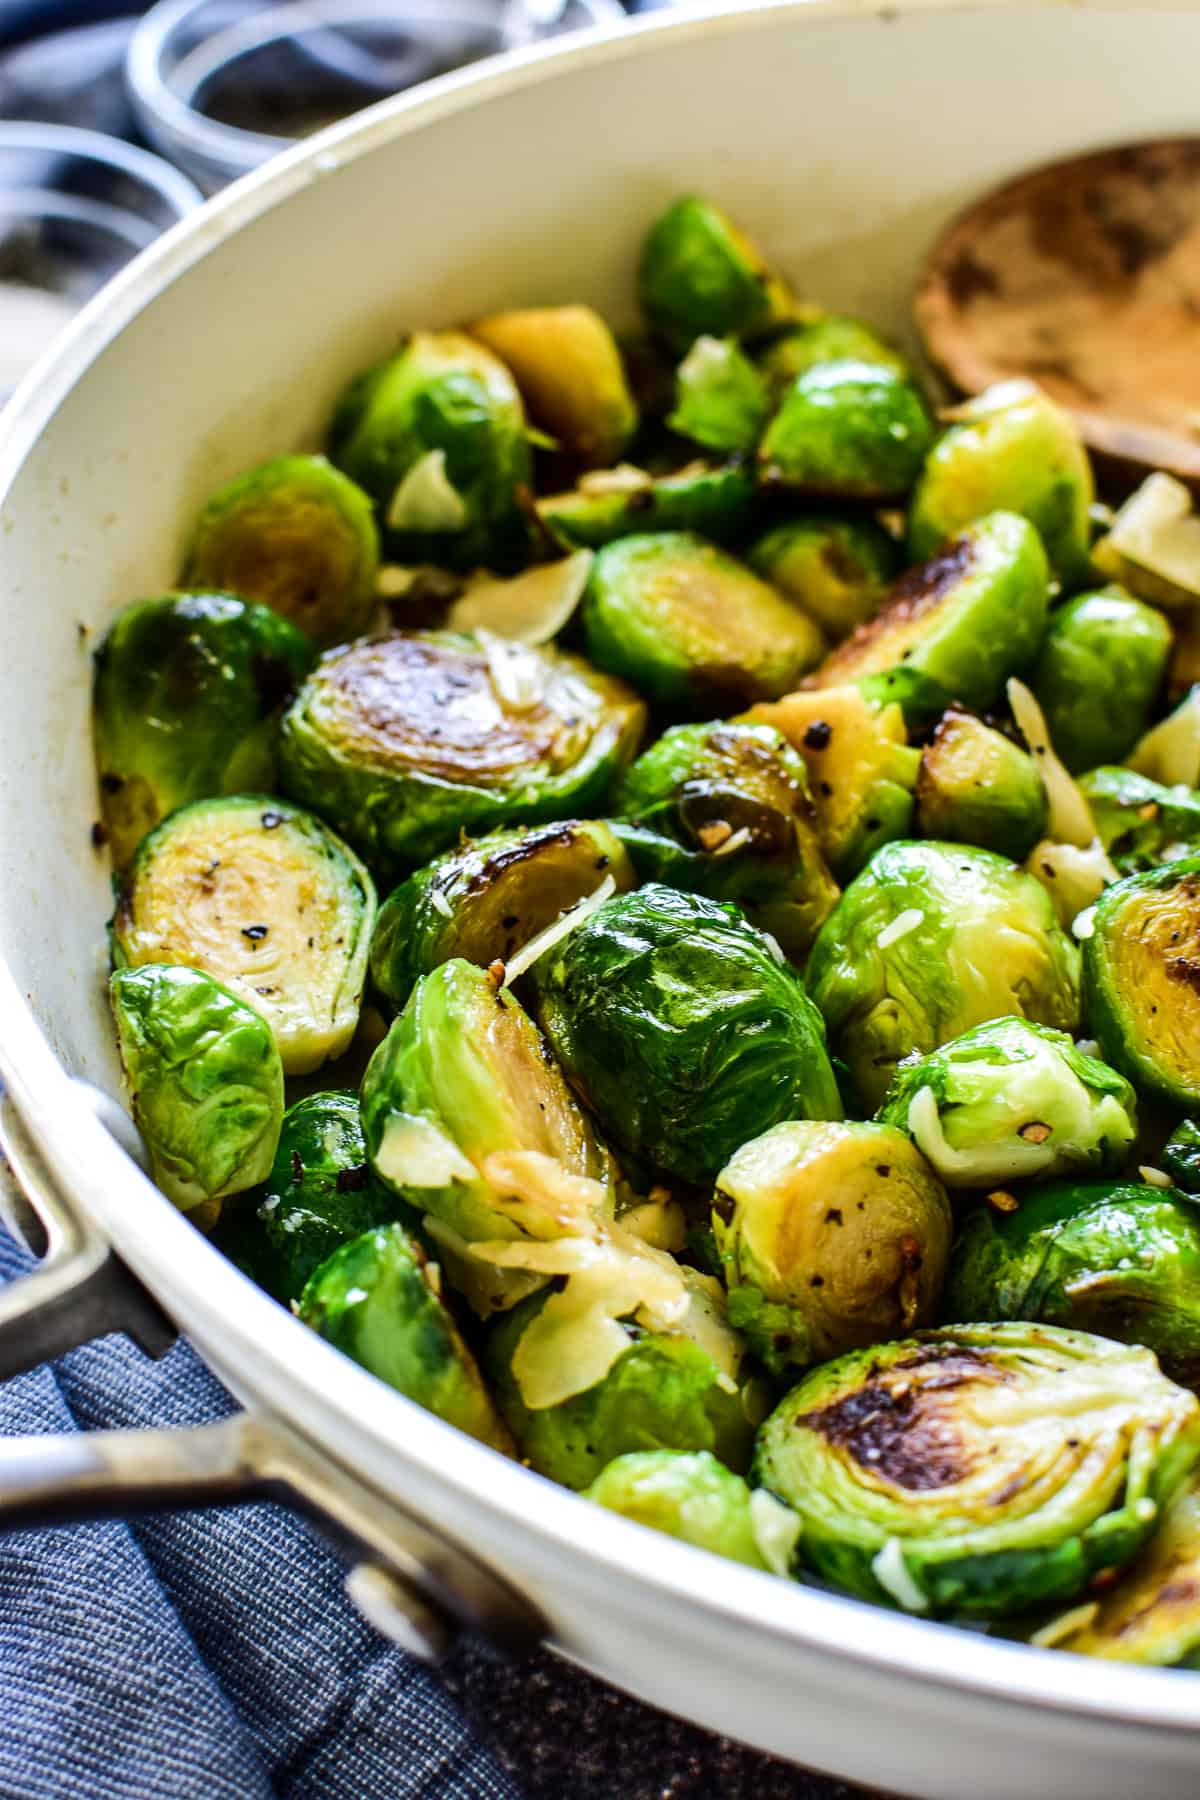 Sauteed brussel sprouts in skillet